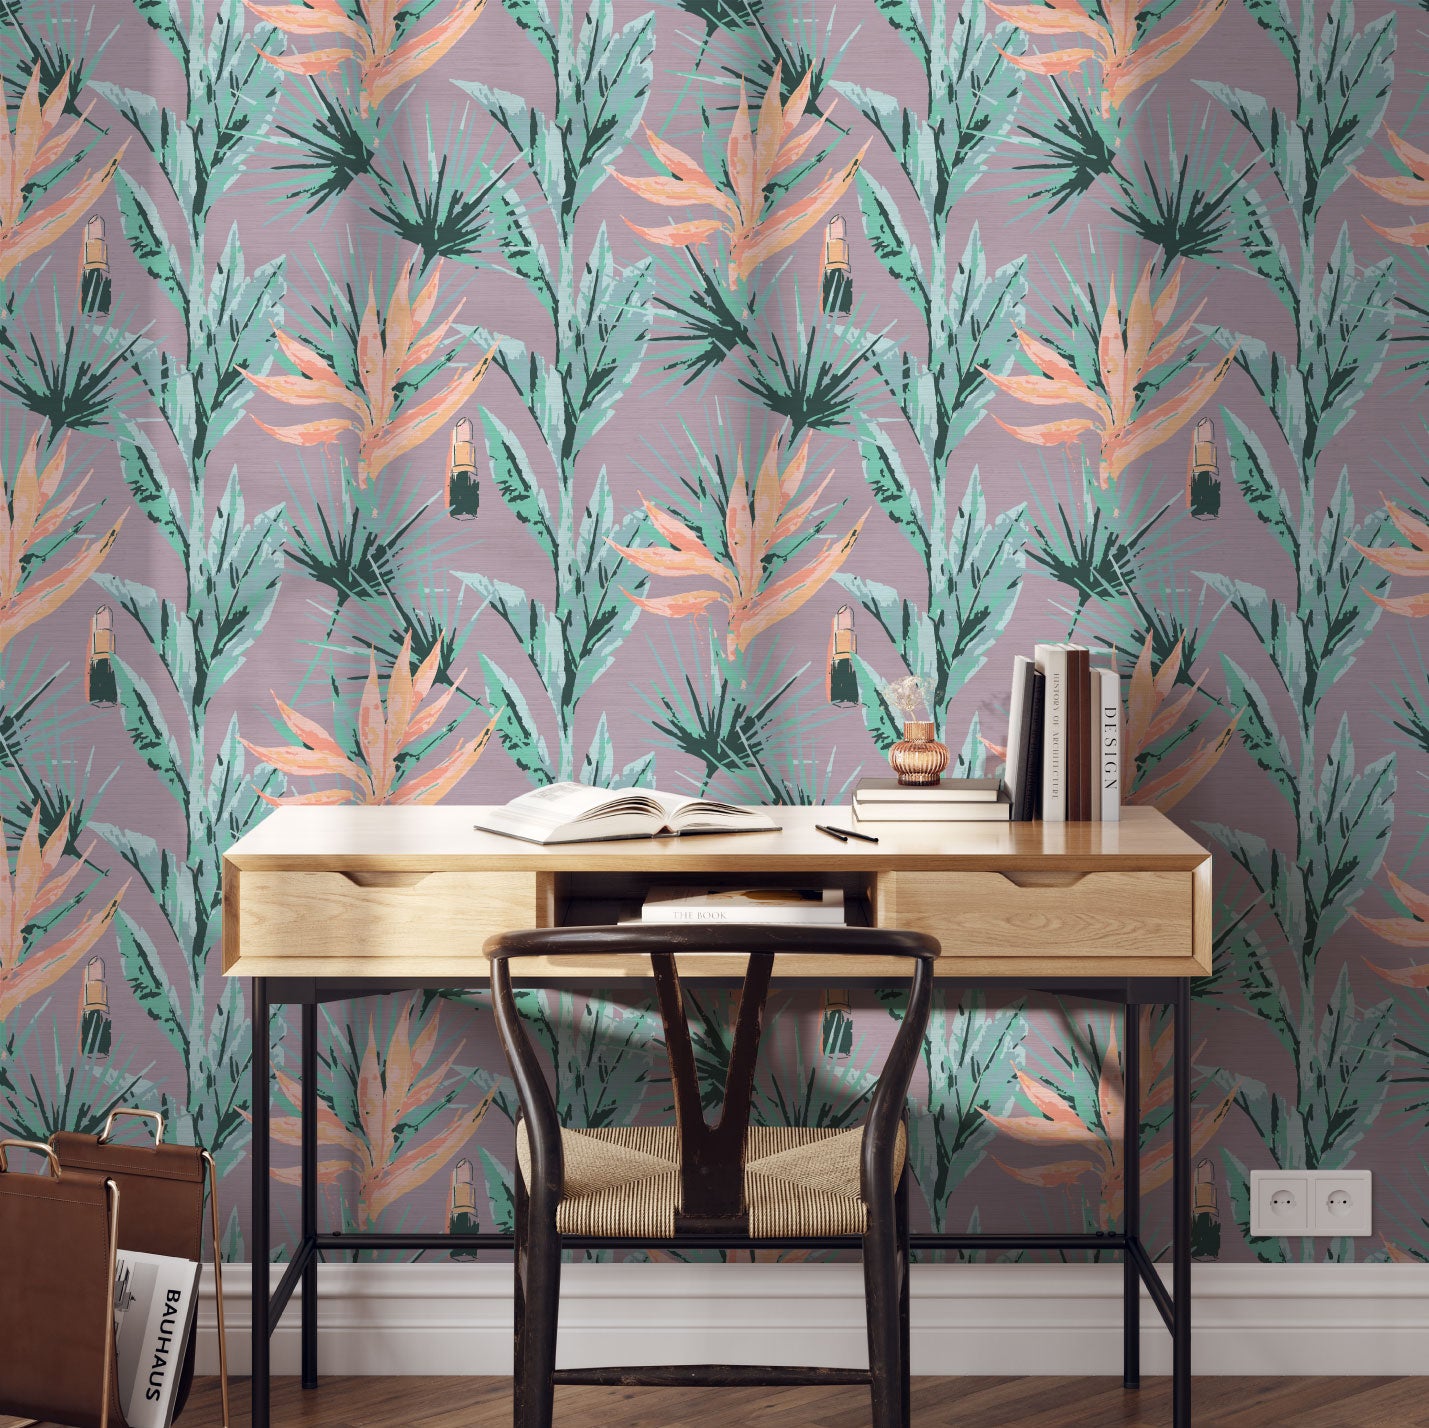 Load image into Gallery viewer, light purple based allover floral print with light pink and orange birds of paradise floral paired with shades of green palm leaves with added light pink lipstick tubes scattered throughout the print Grasscloth Natural Textured Eco-Friendly Non-toxic High-quality  Sustainable practices Sustainability Interior Design Wall covering bold vertical stripe botanical flowers garden tropical jungle beauty salon medspa makeup office study
